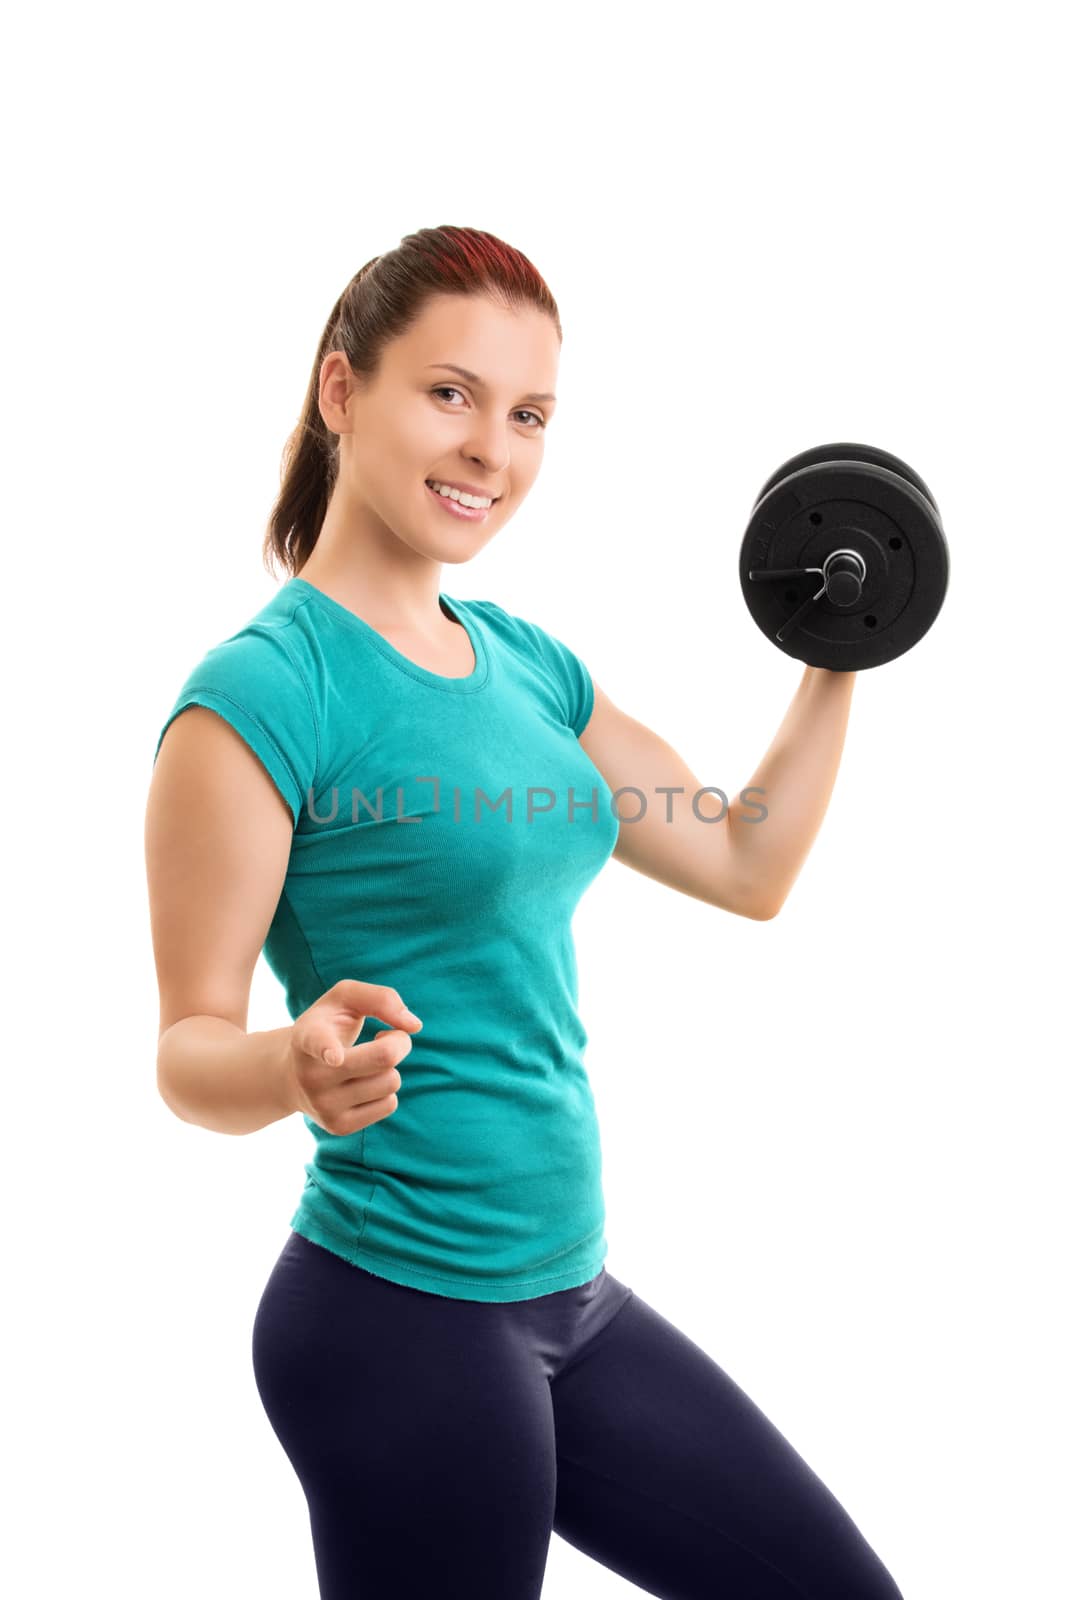 I pull my weight. I exercise. Do you?Beautiful young girl lifting weights and pointing towards you, isolated on white background.